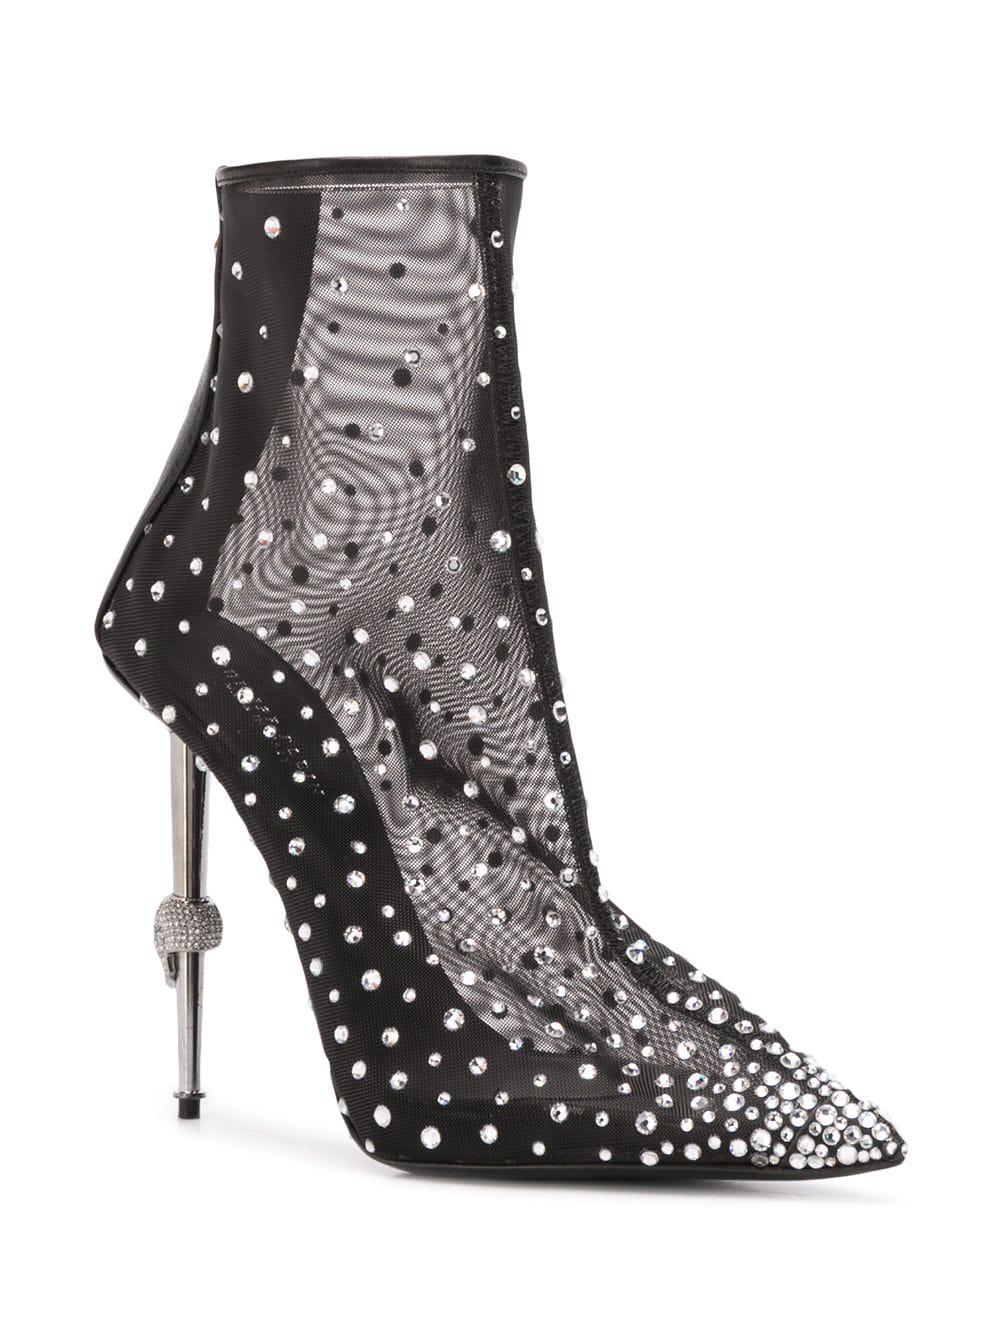 Philipp Plein Leather Crystal Embellished Mesh Ankle Boots in Black - Lyst